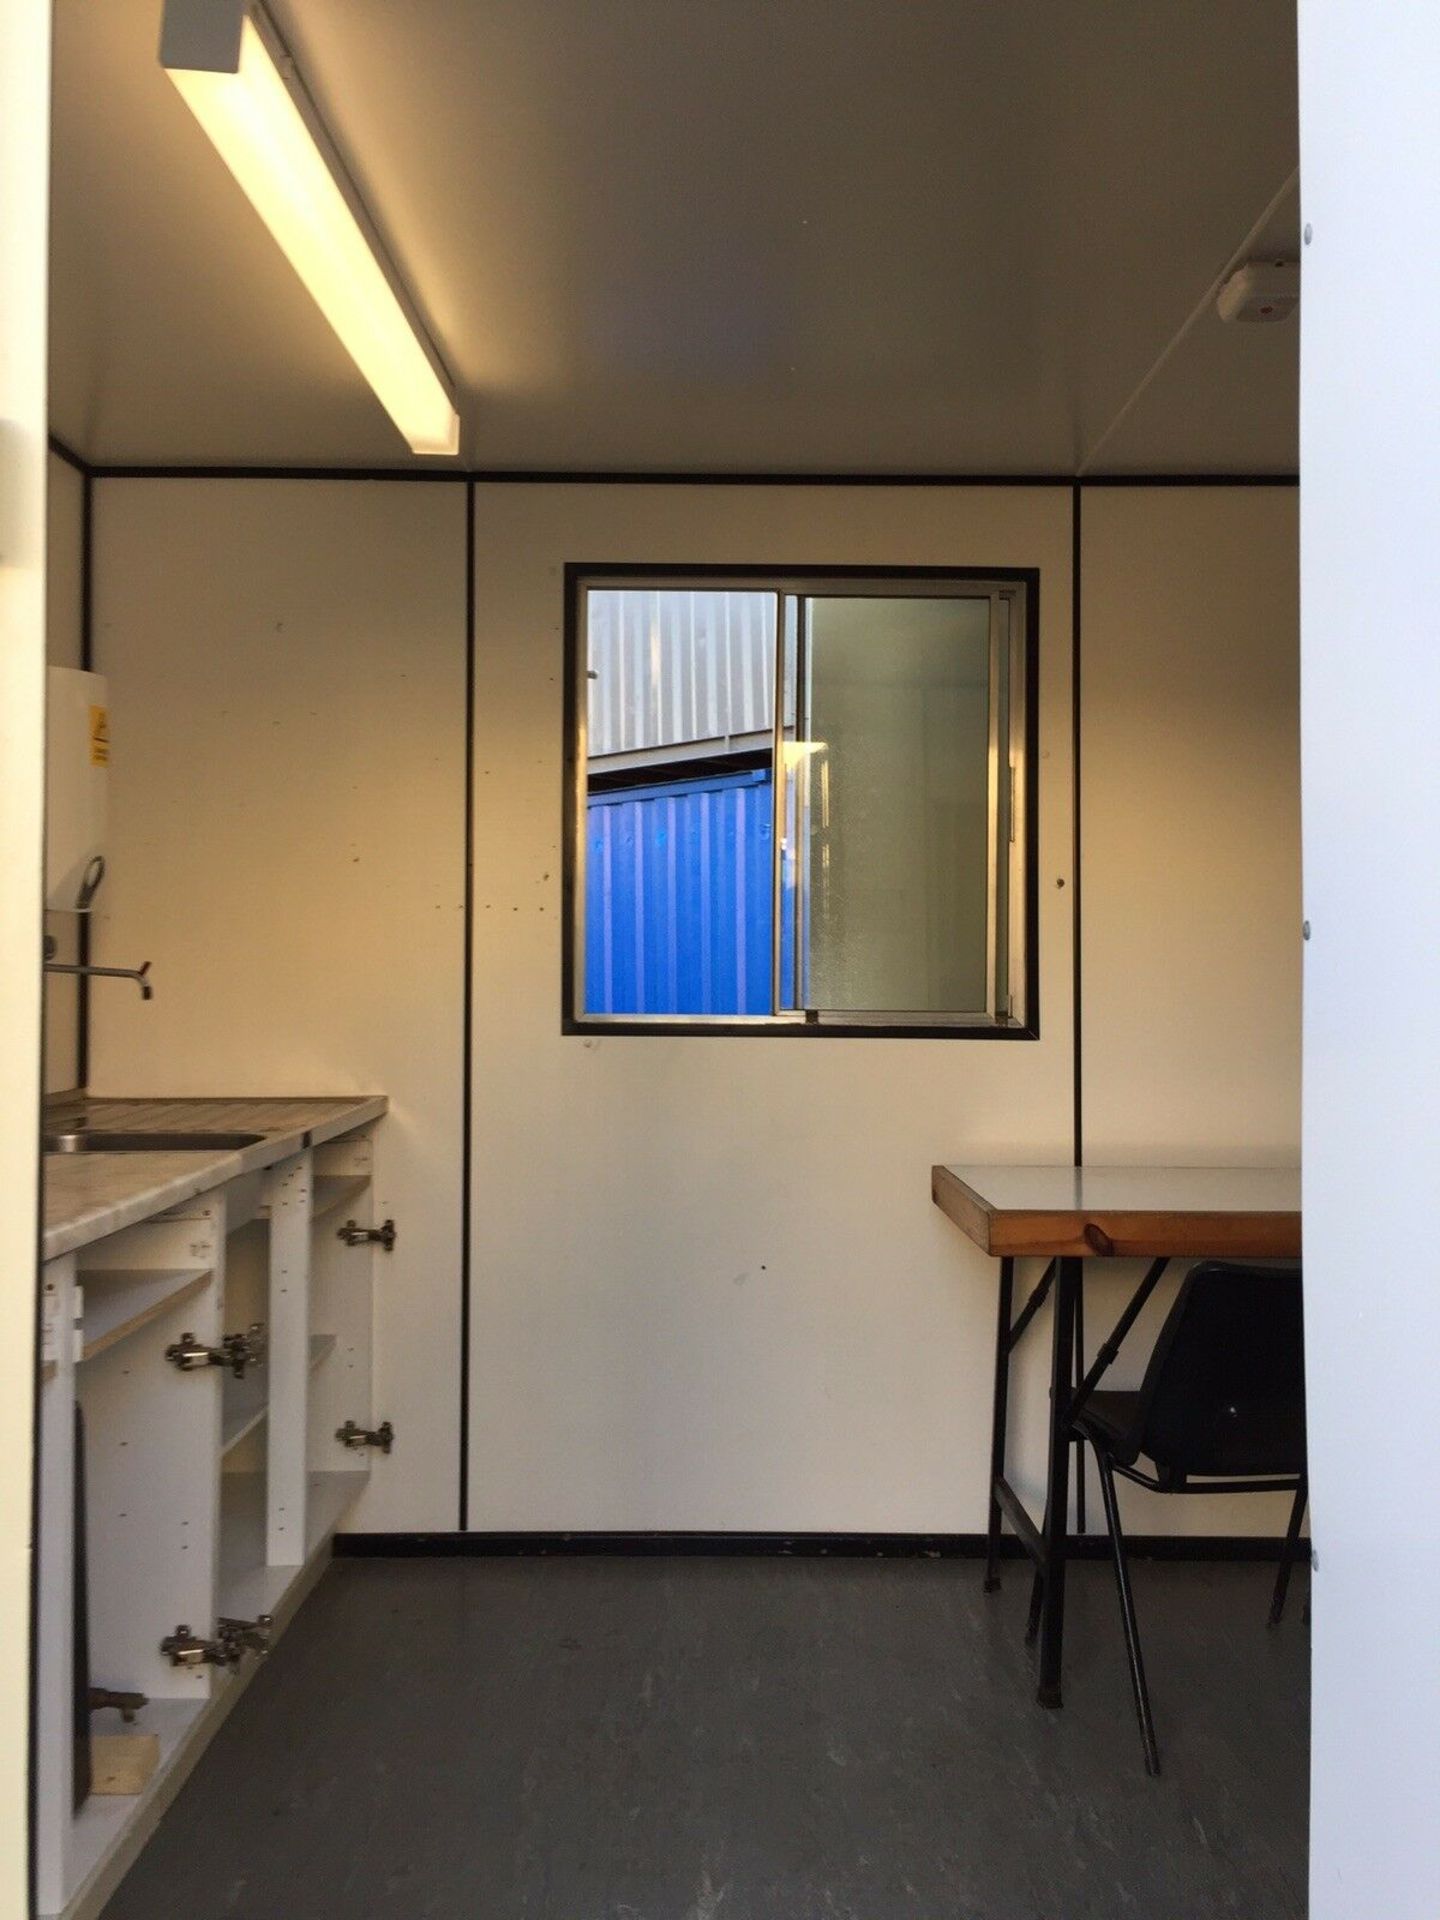 Site Welfare Unit Office Cabin Drying Room Canteen - Image 5 of 9